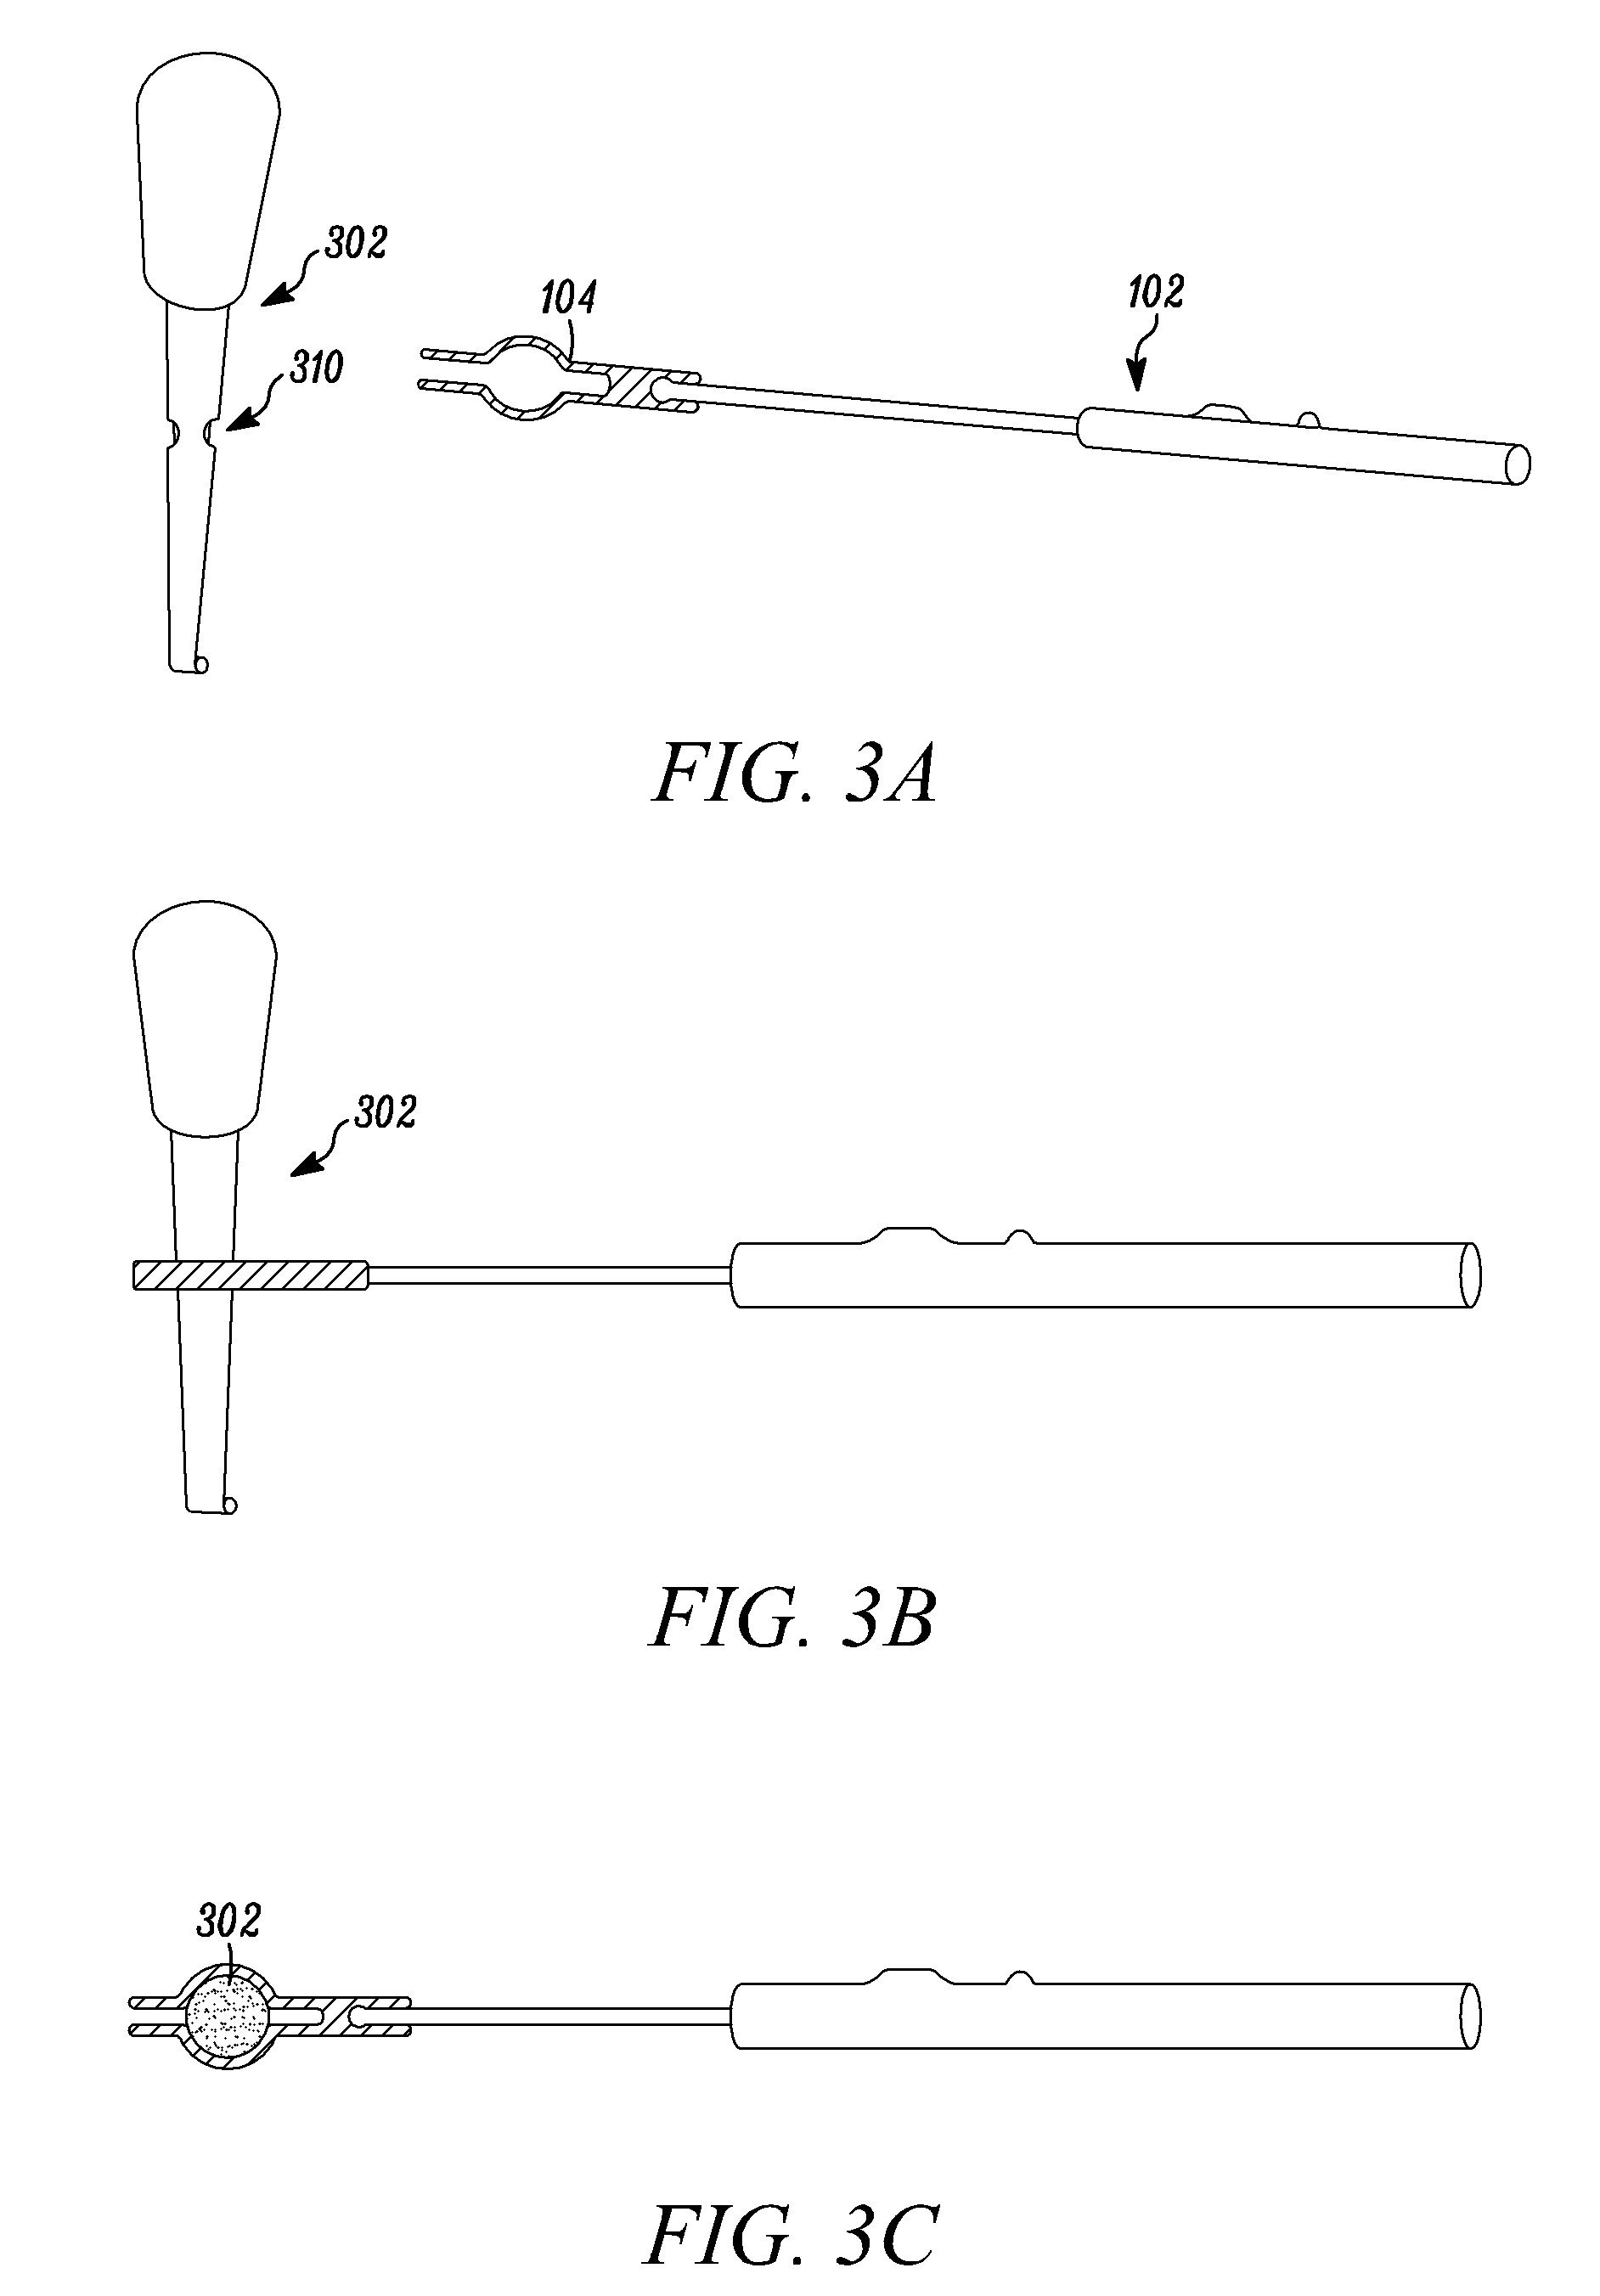 Neurophysiological apparatus and procedures